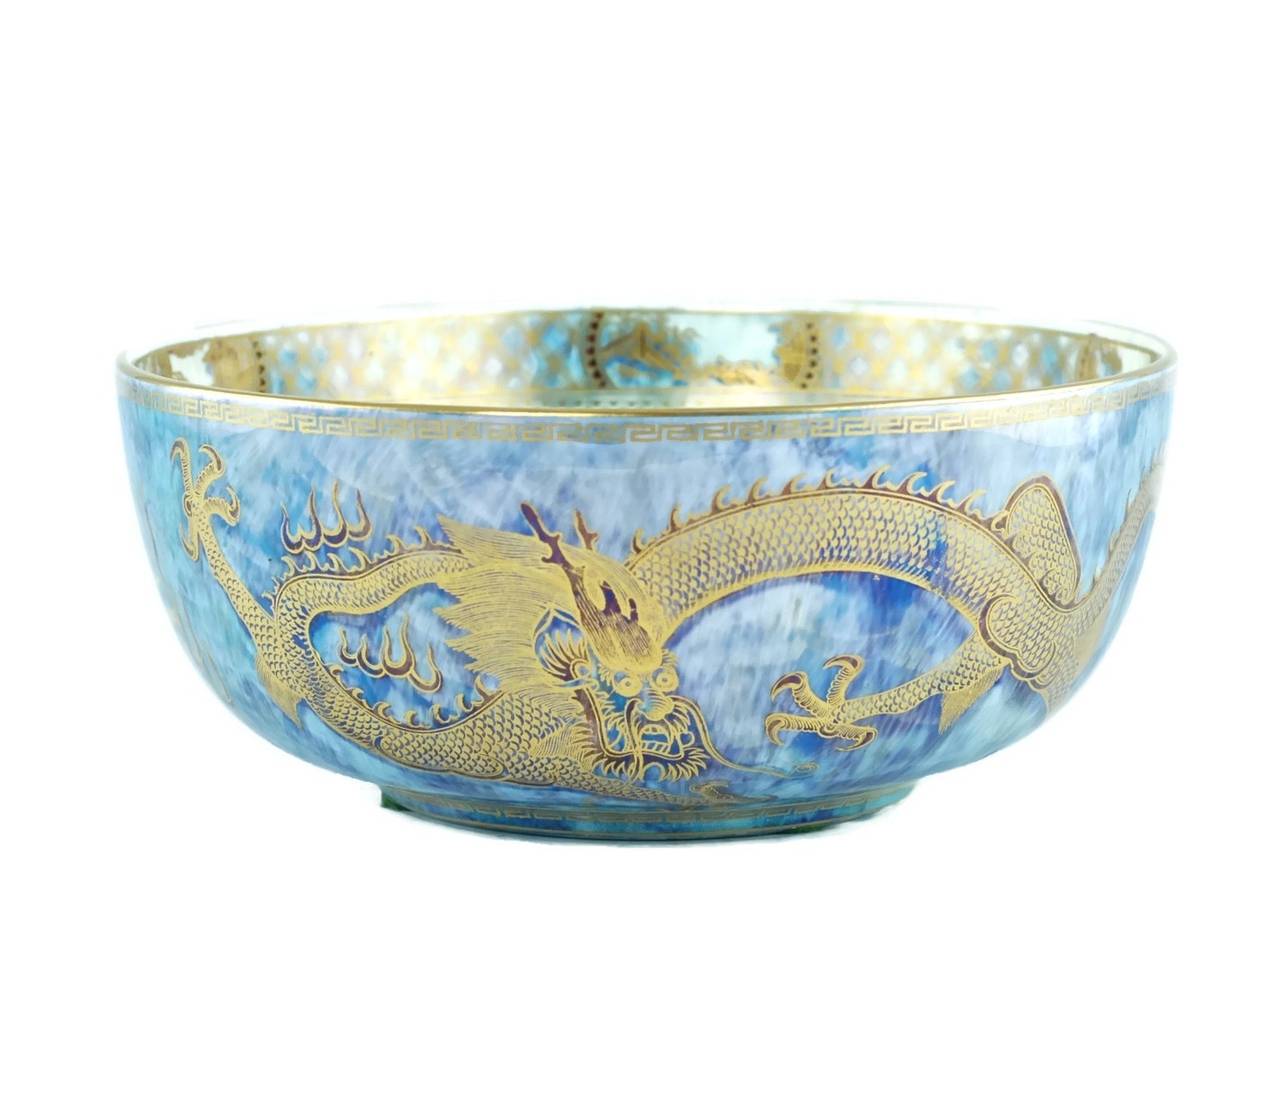 This English porcelain bowl is from Wedgwood's eminently collectible Fairyland Lustre range designed by artist Daisy Makeig-Jones. Fairyland Lustre, introduced in 1915, was a radical departure from Wedgwood's traditional 18th and 19th century